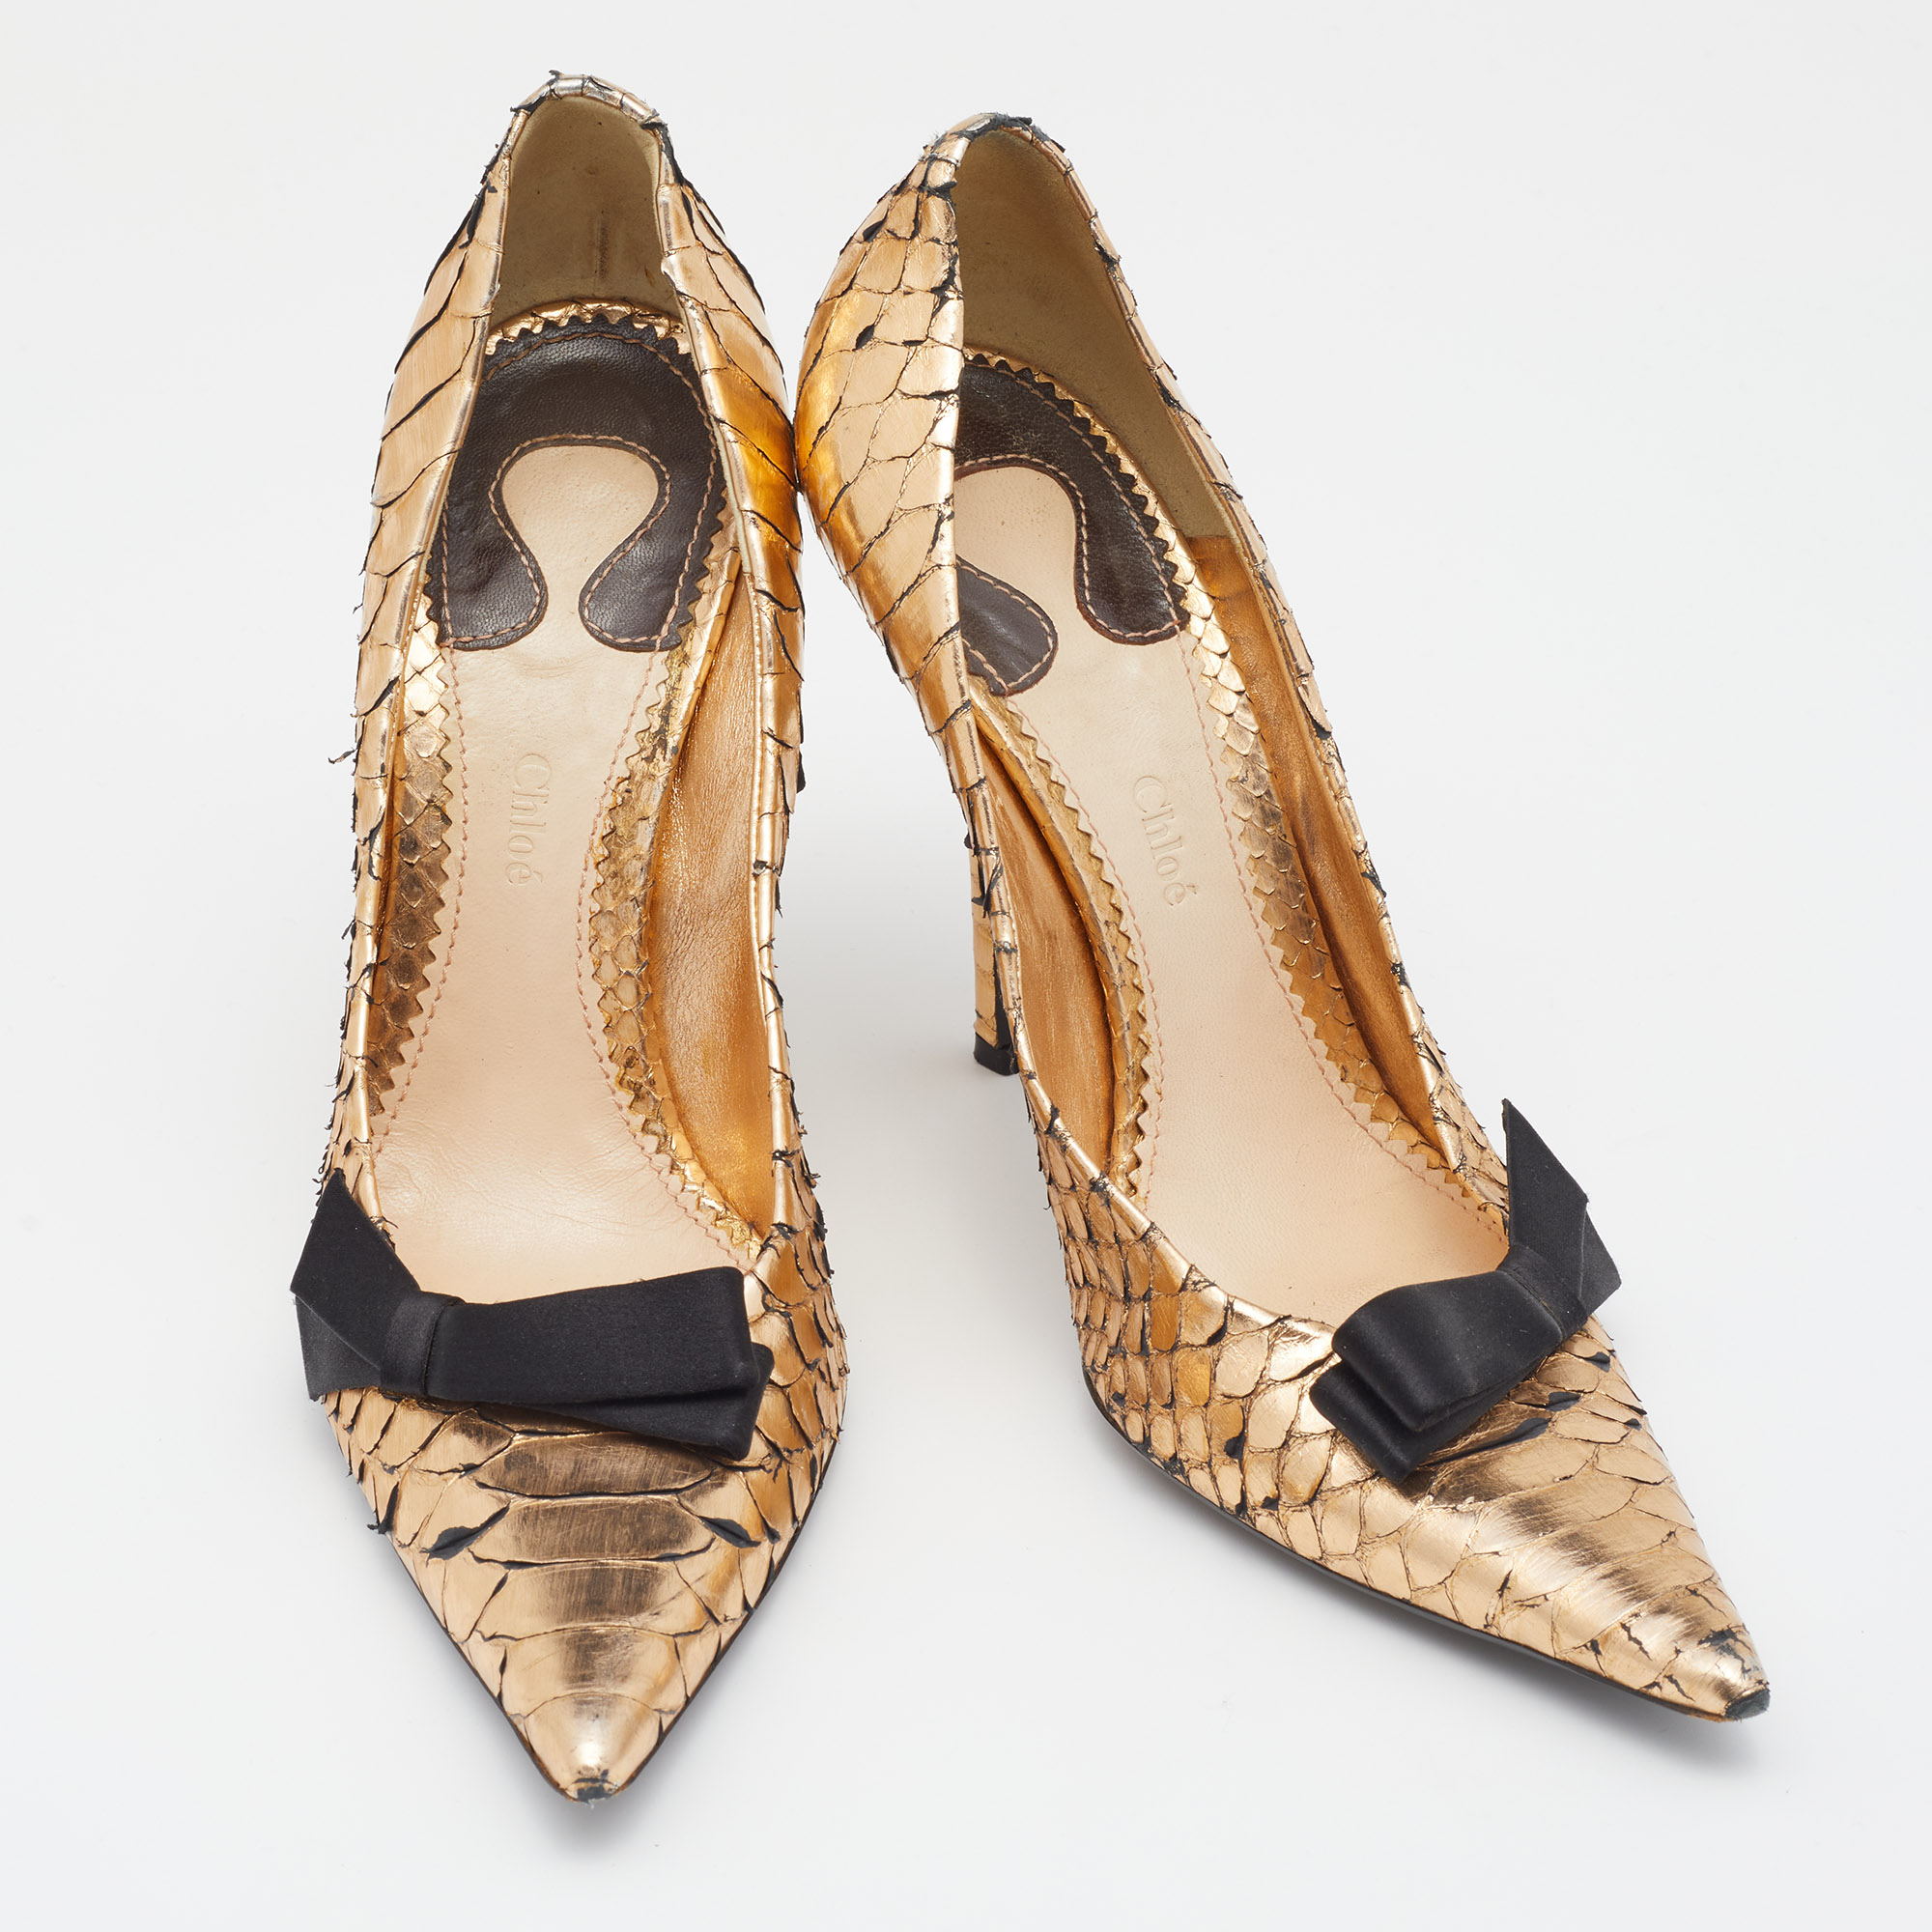 Chloe Metallic Gold Python Leather Bow Detail Pointed Toe Pumps Size 38.5